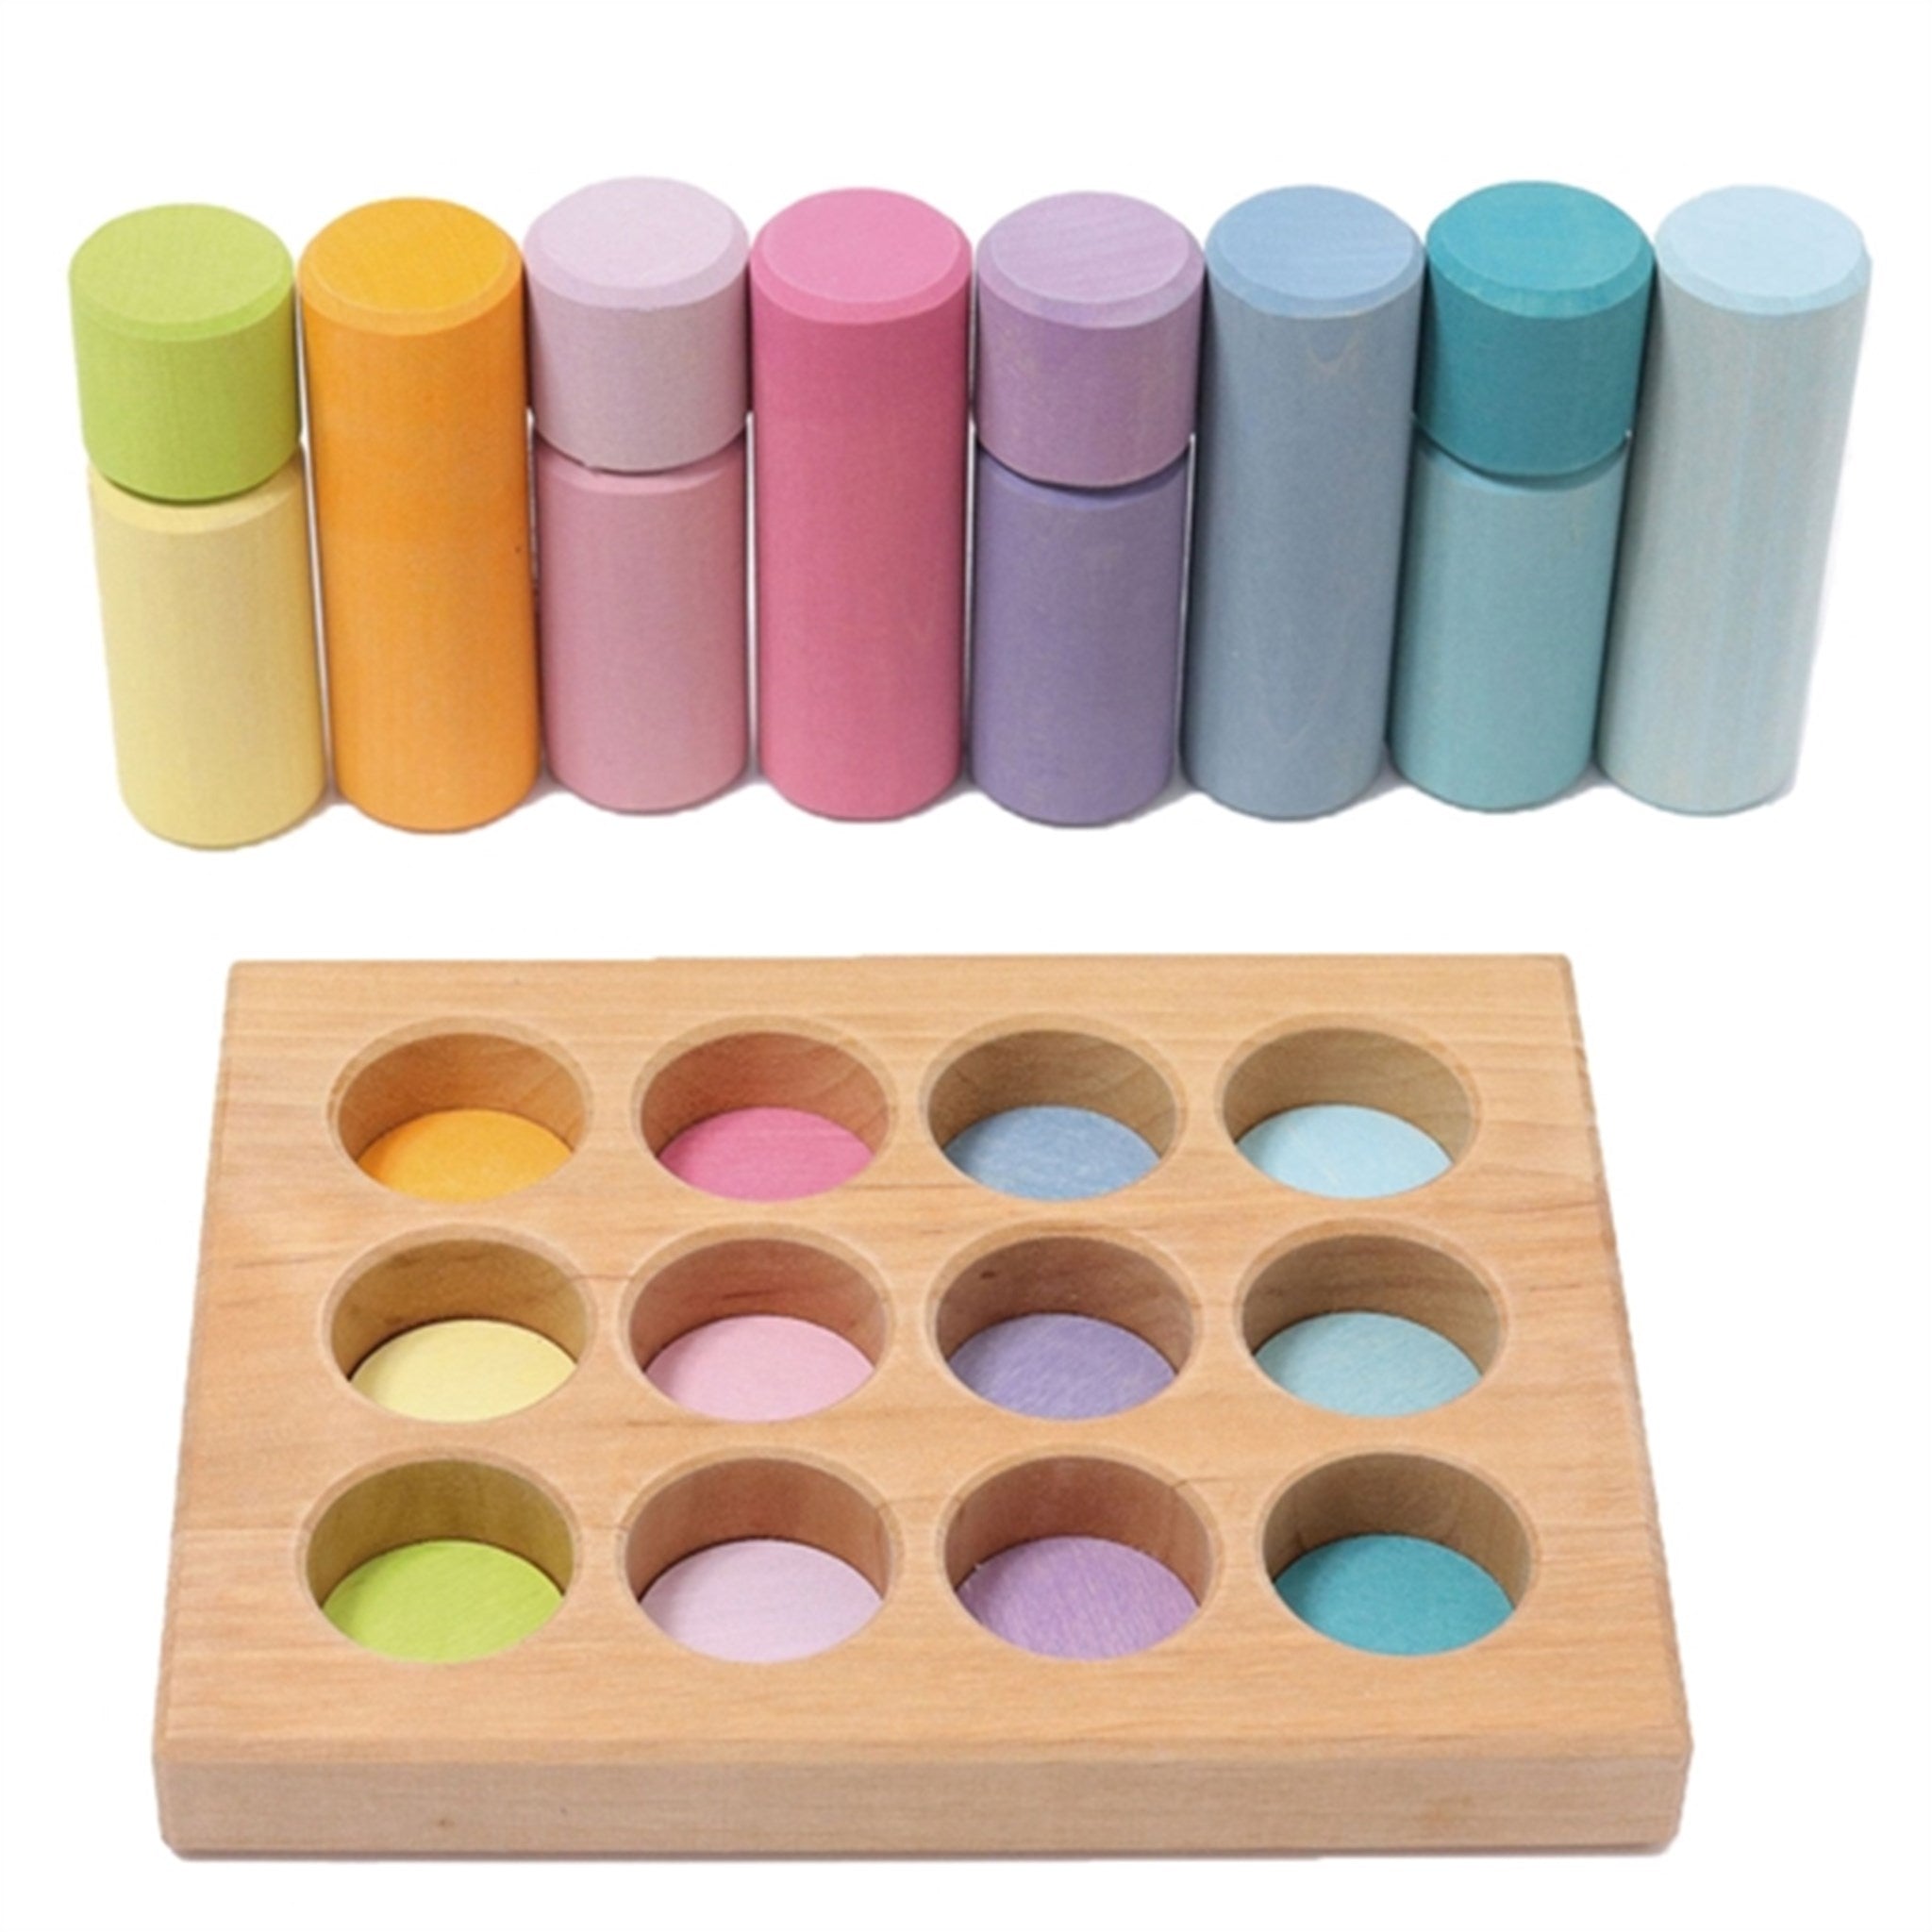 GRIMM´S Stacking Game Small Pastel Rollers